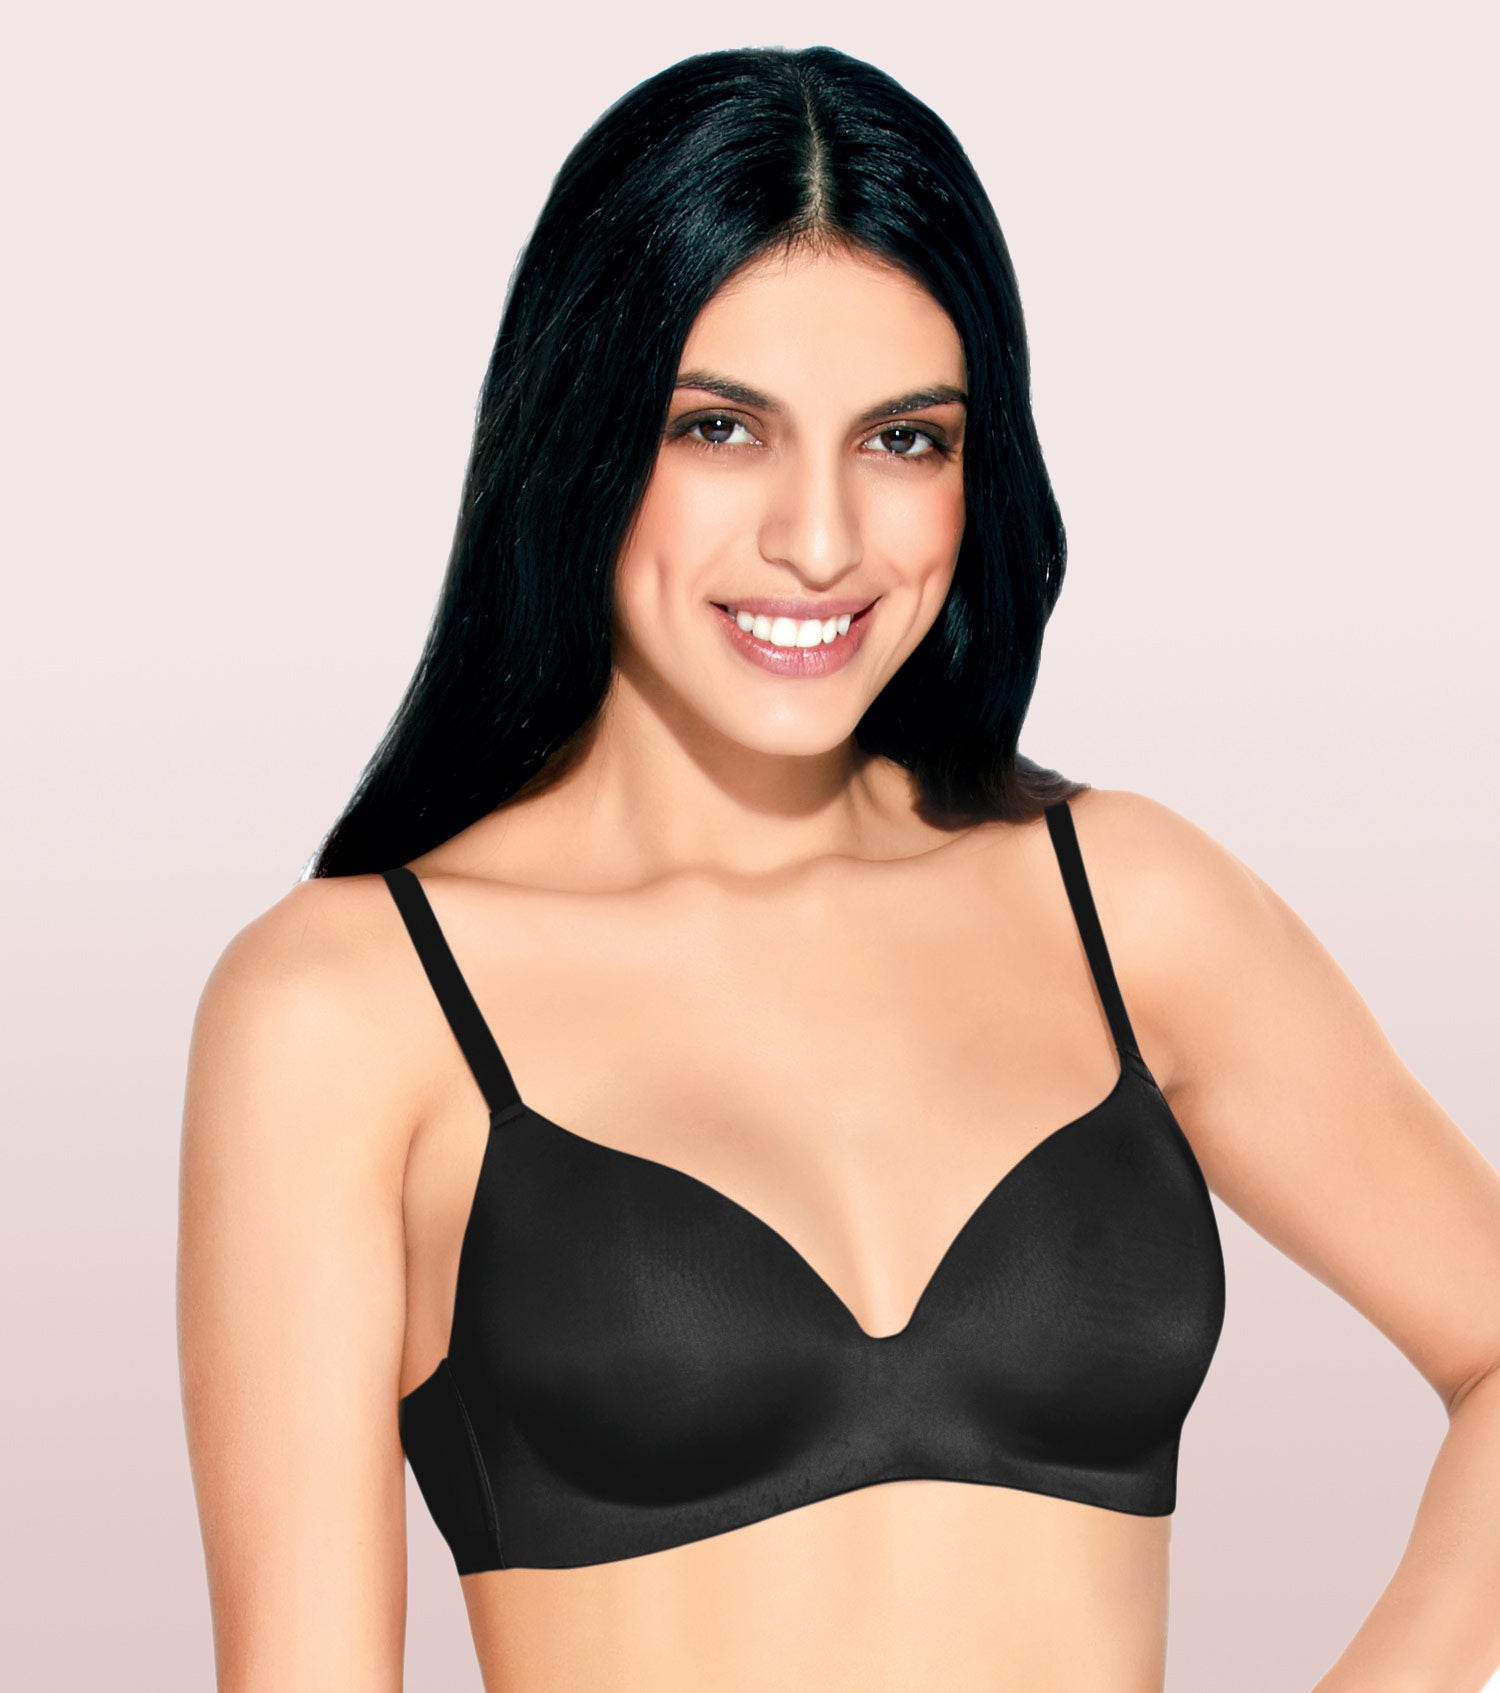 Enamor A019 T-Shirt Cotton Bra - Non-Padded Wirefree - Black 38C